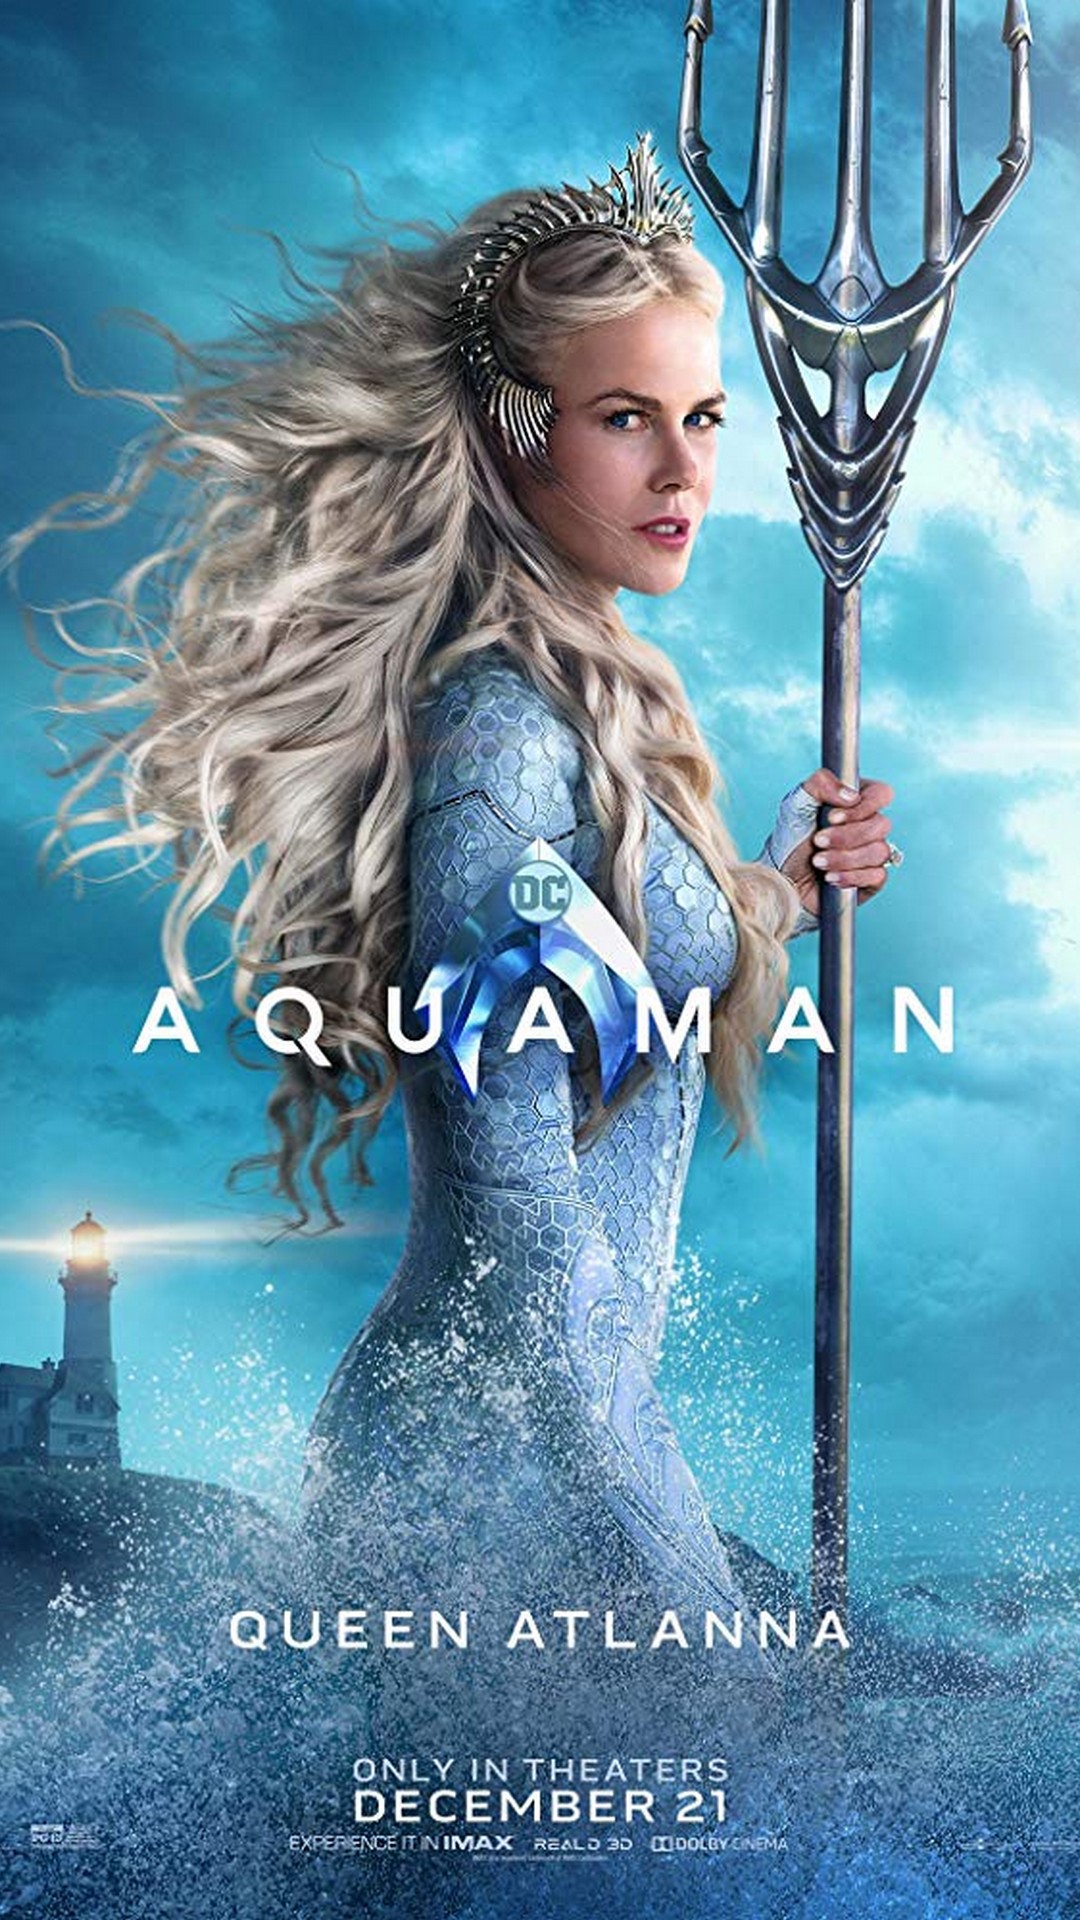 Aquaman 2018 HD Wallpapers For Android with resolution 1080X1920 pixel. You can make this wallpaper for your Android backgrounds, Tablet, Smartphones Screensavers and Mobile Phone Lock Screen